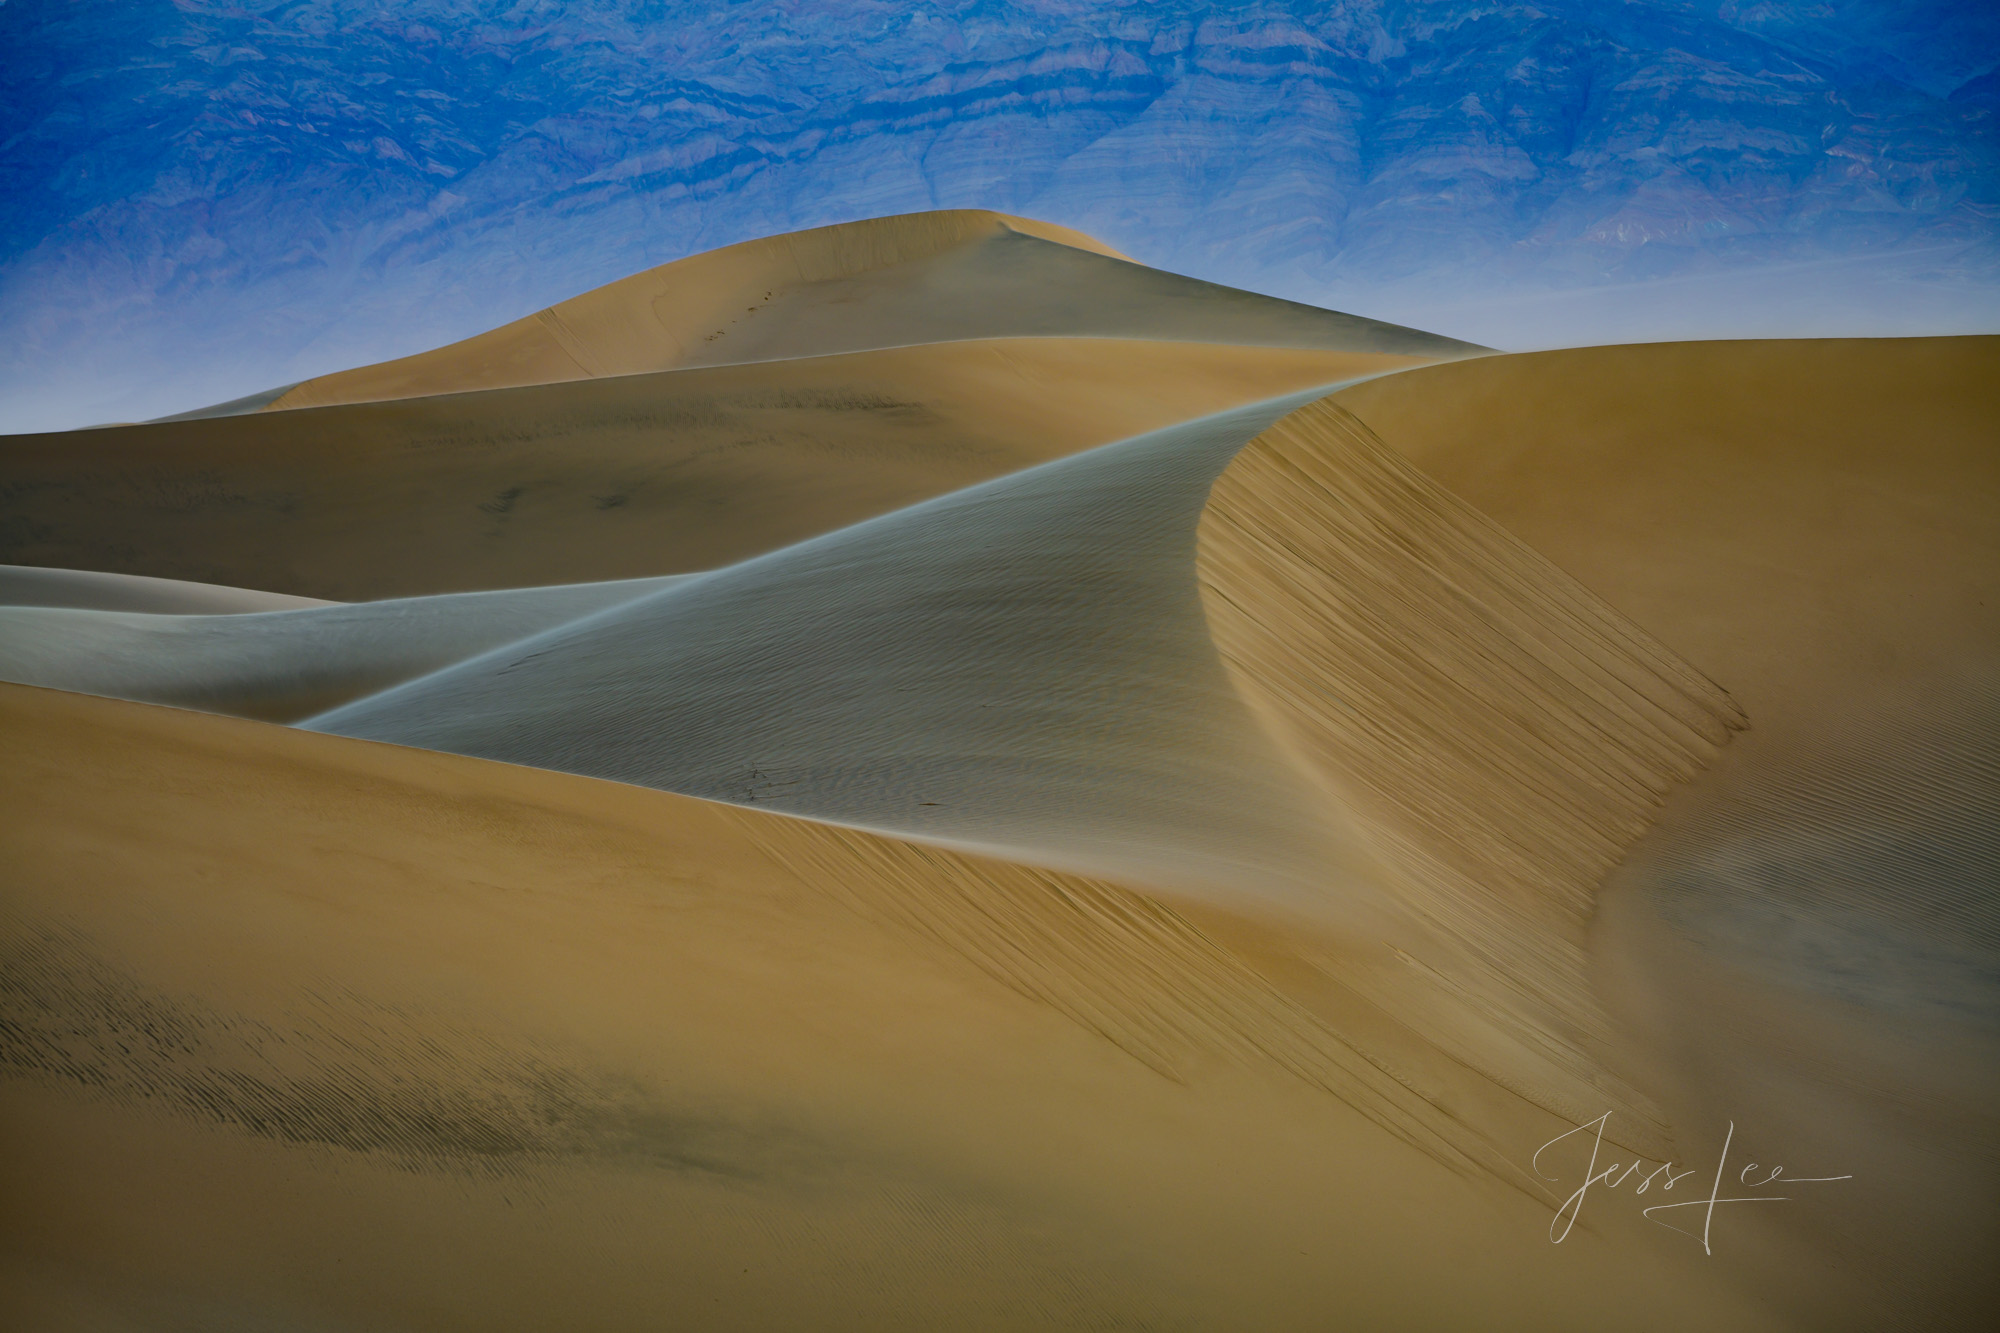 Under the Moon, a Fine Art Limited Edition Photo Print from Death Valley National Park. Enjoy this beautiful piece of desert...